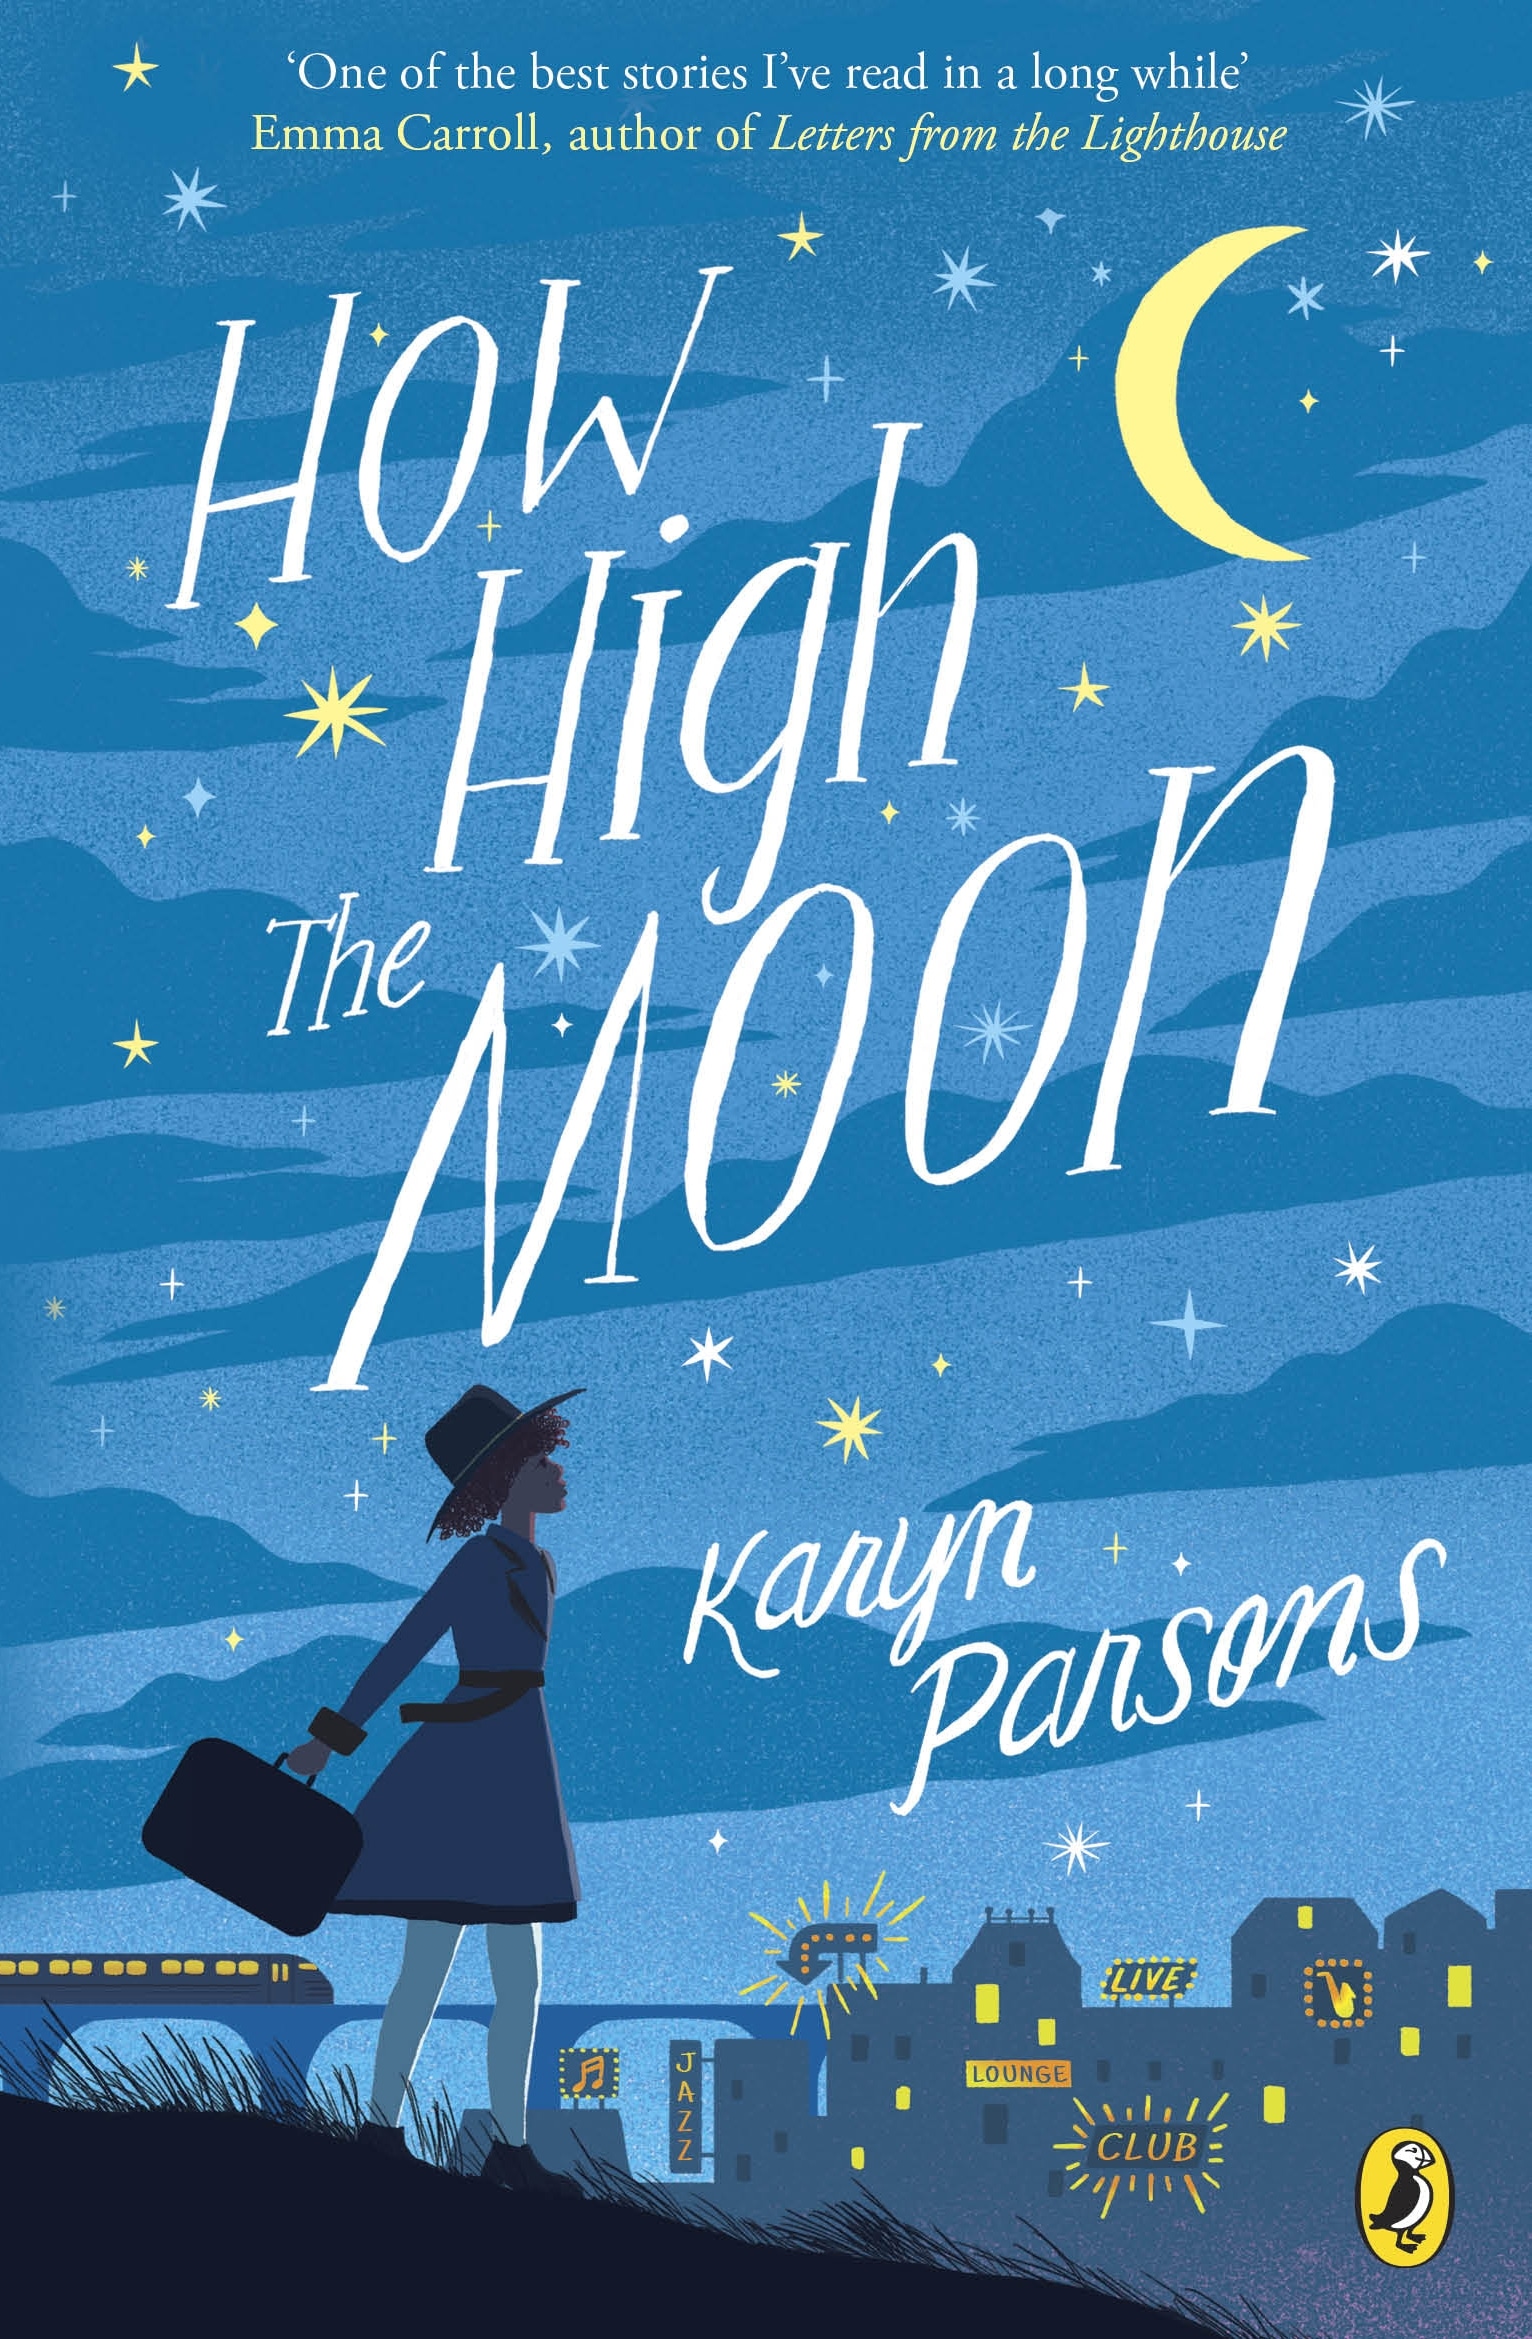 Book “How High The Moon” by Karyn Parsons — March 7, 2019